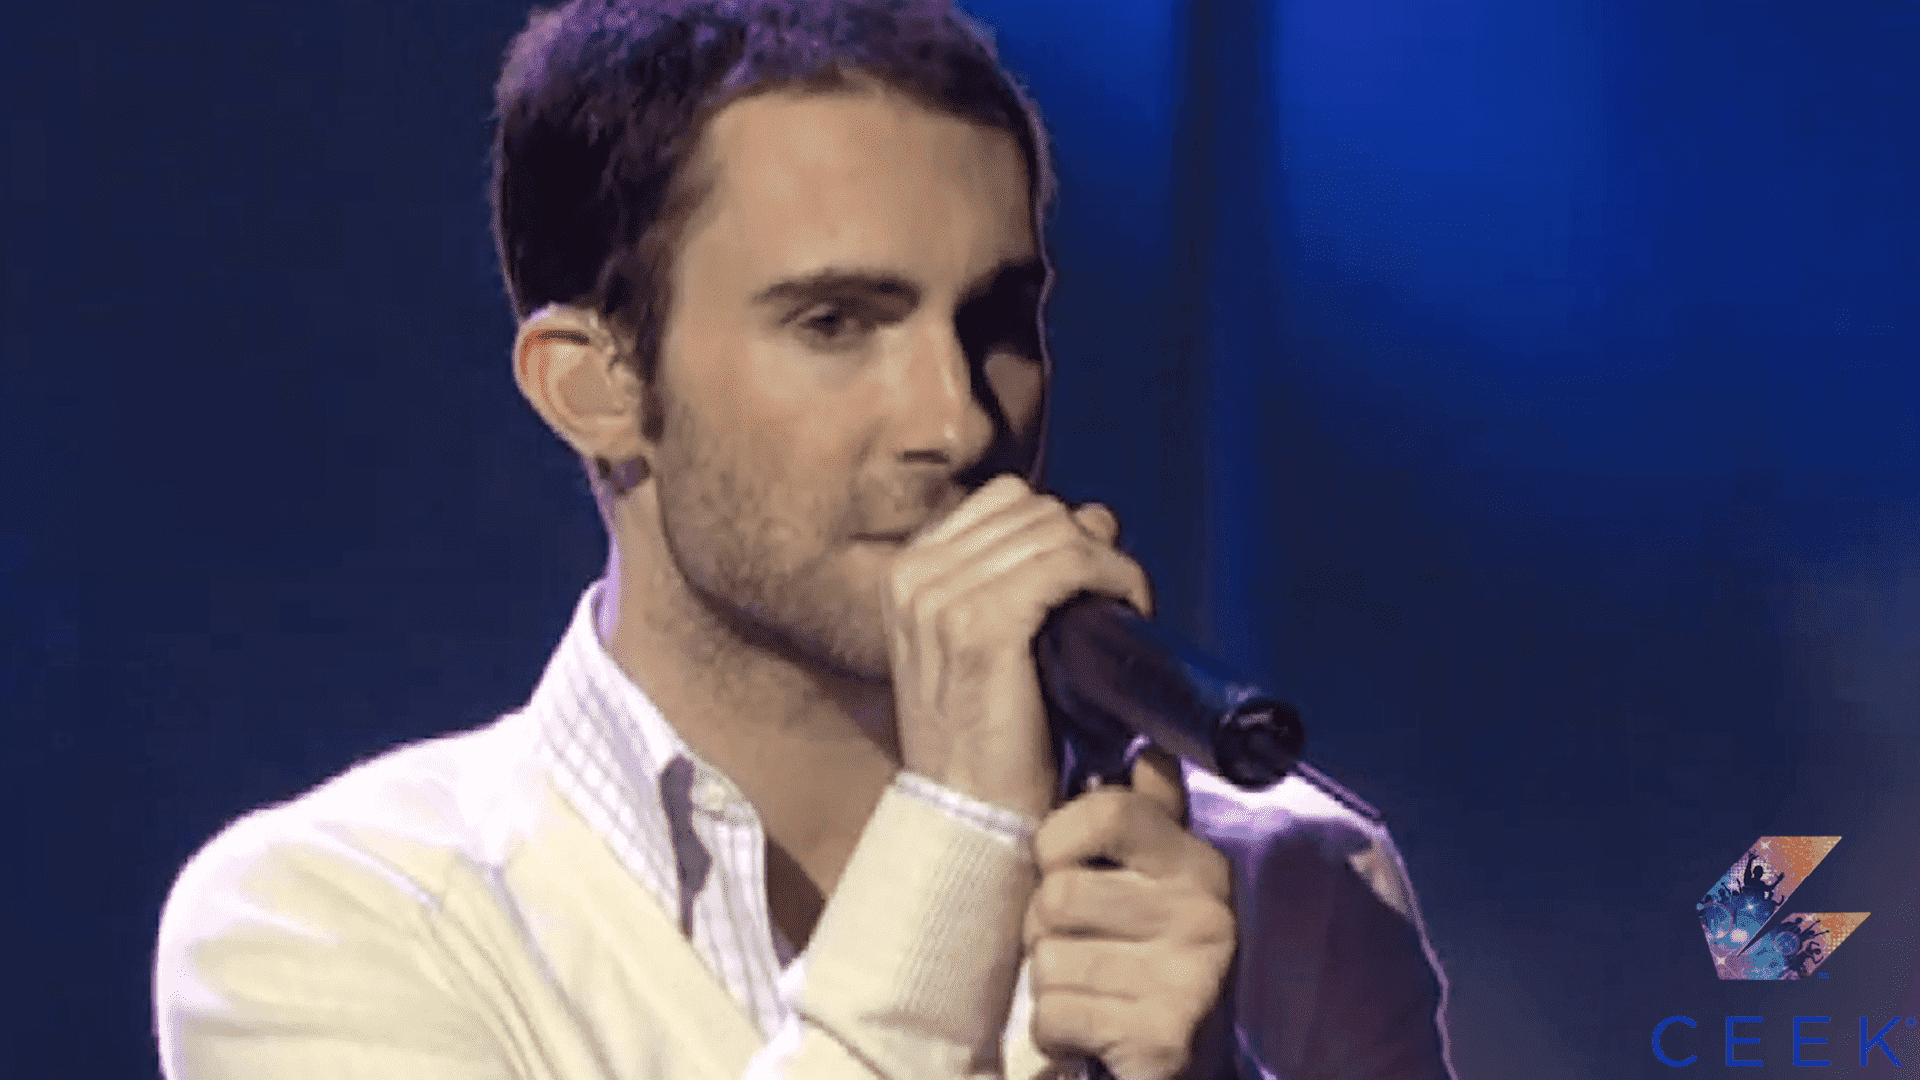 Maroon 5 Perform She Will Be Loved at the World Music Awards